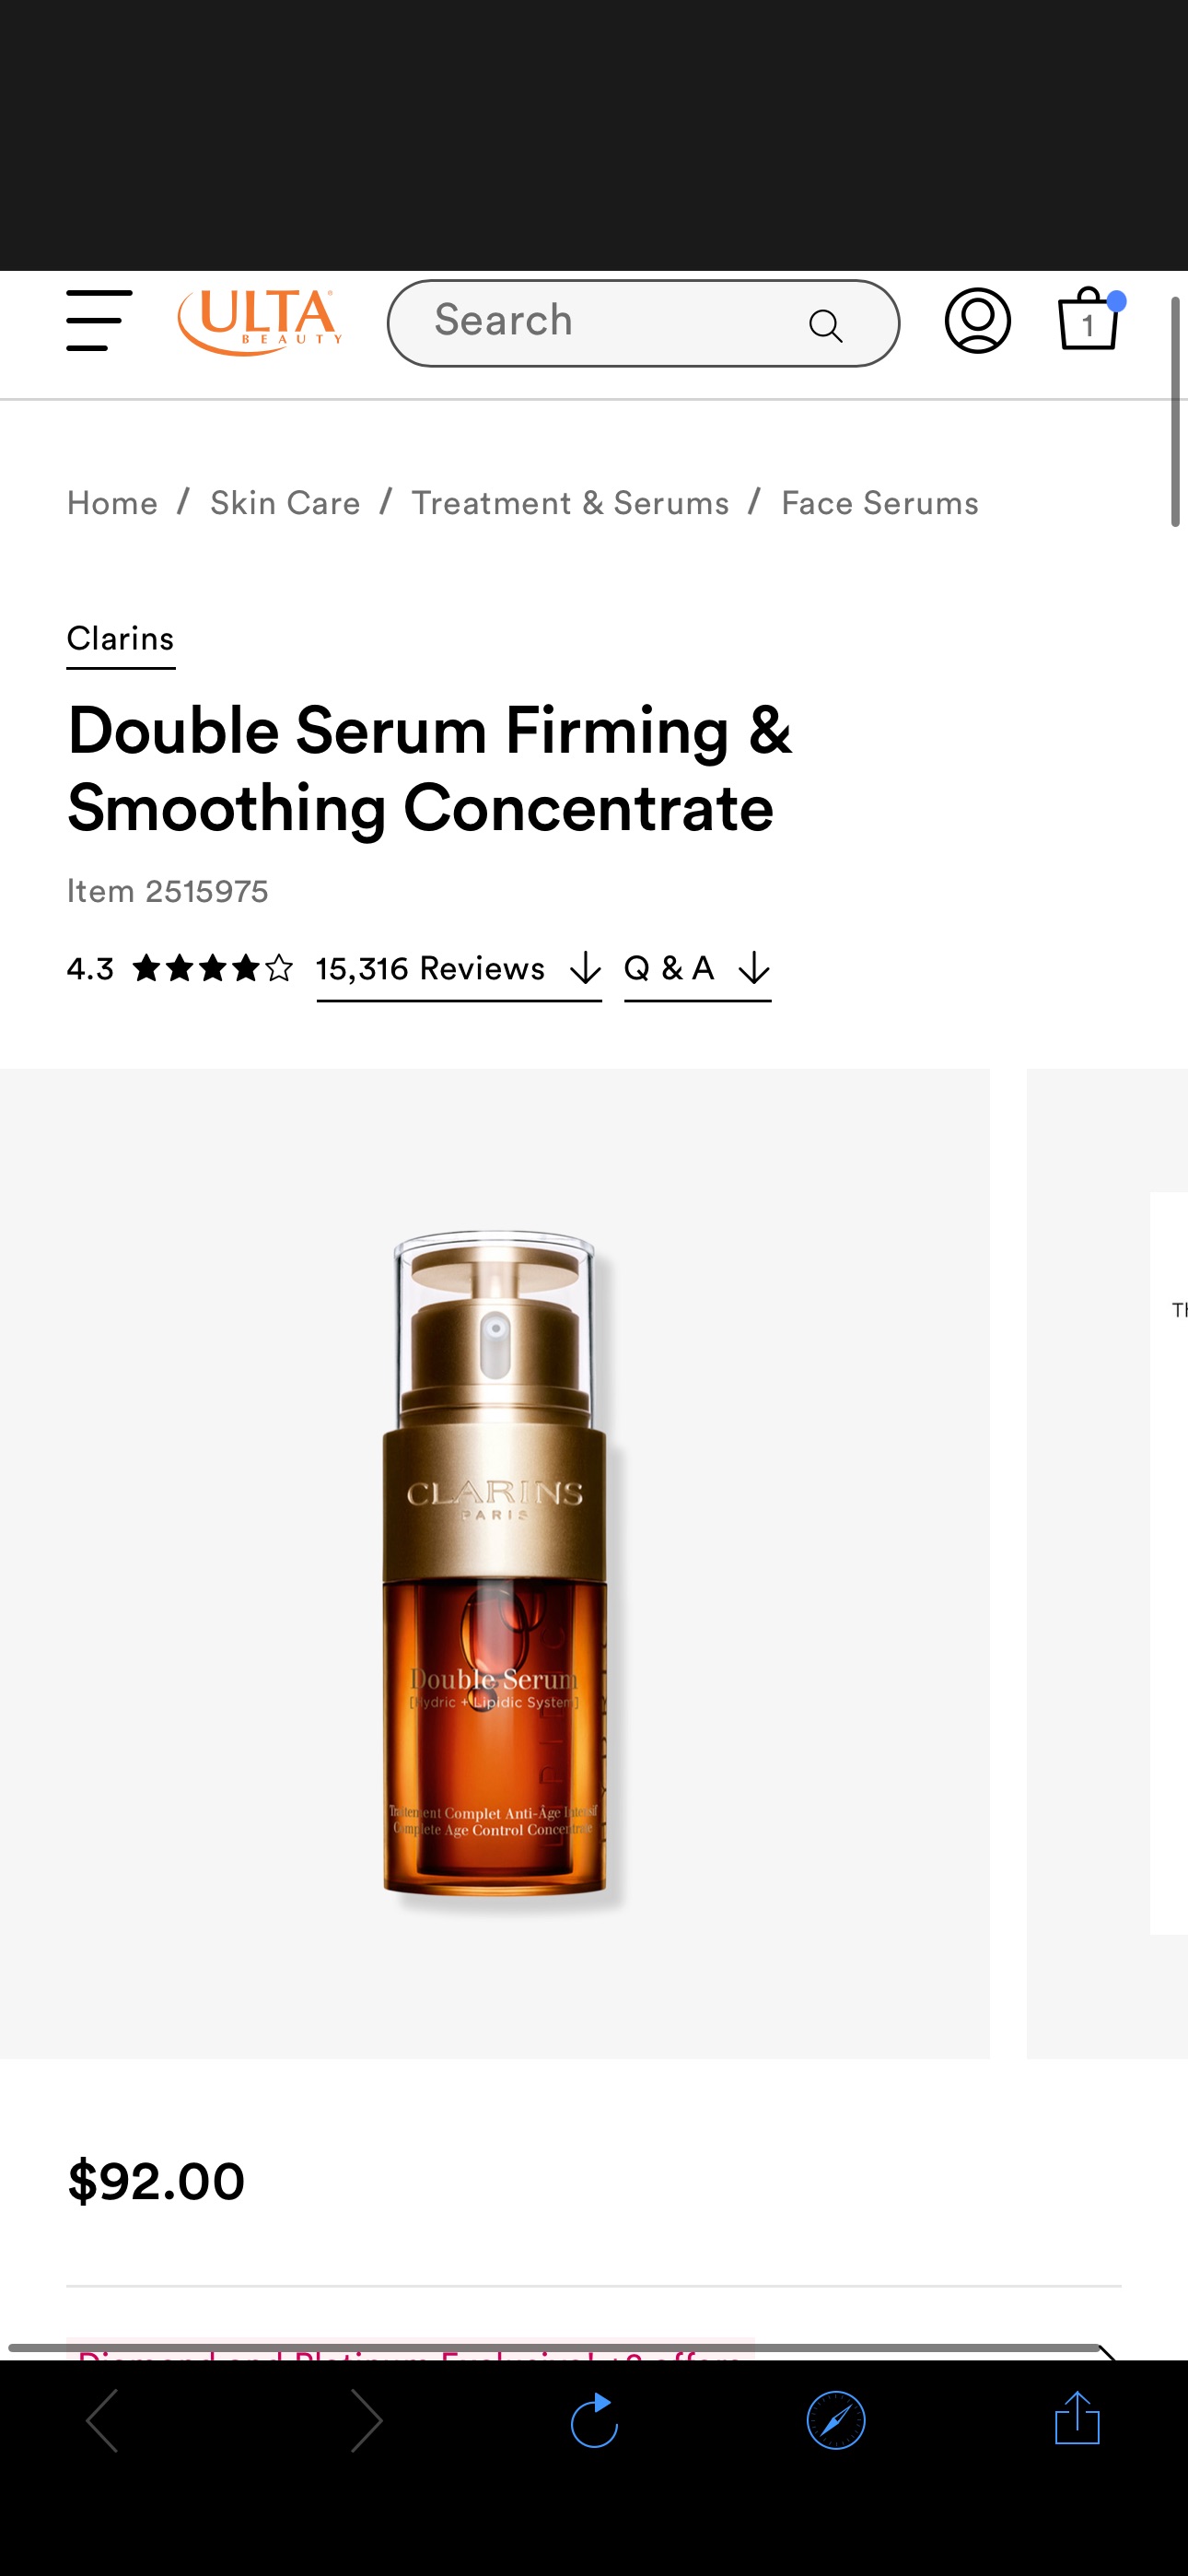 Double Serum Firming & Smoothing Concentrate - Clarins | Ulta Beauty